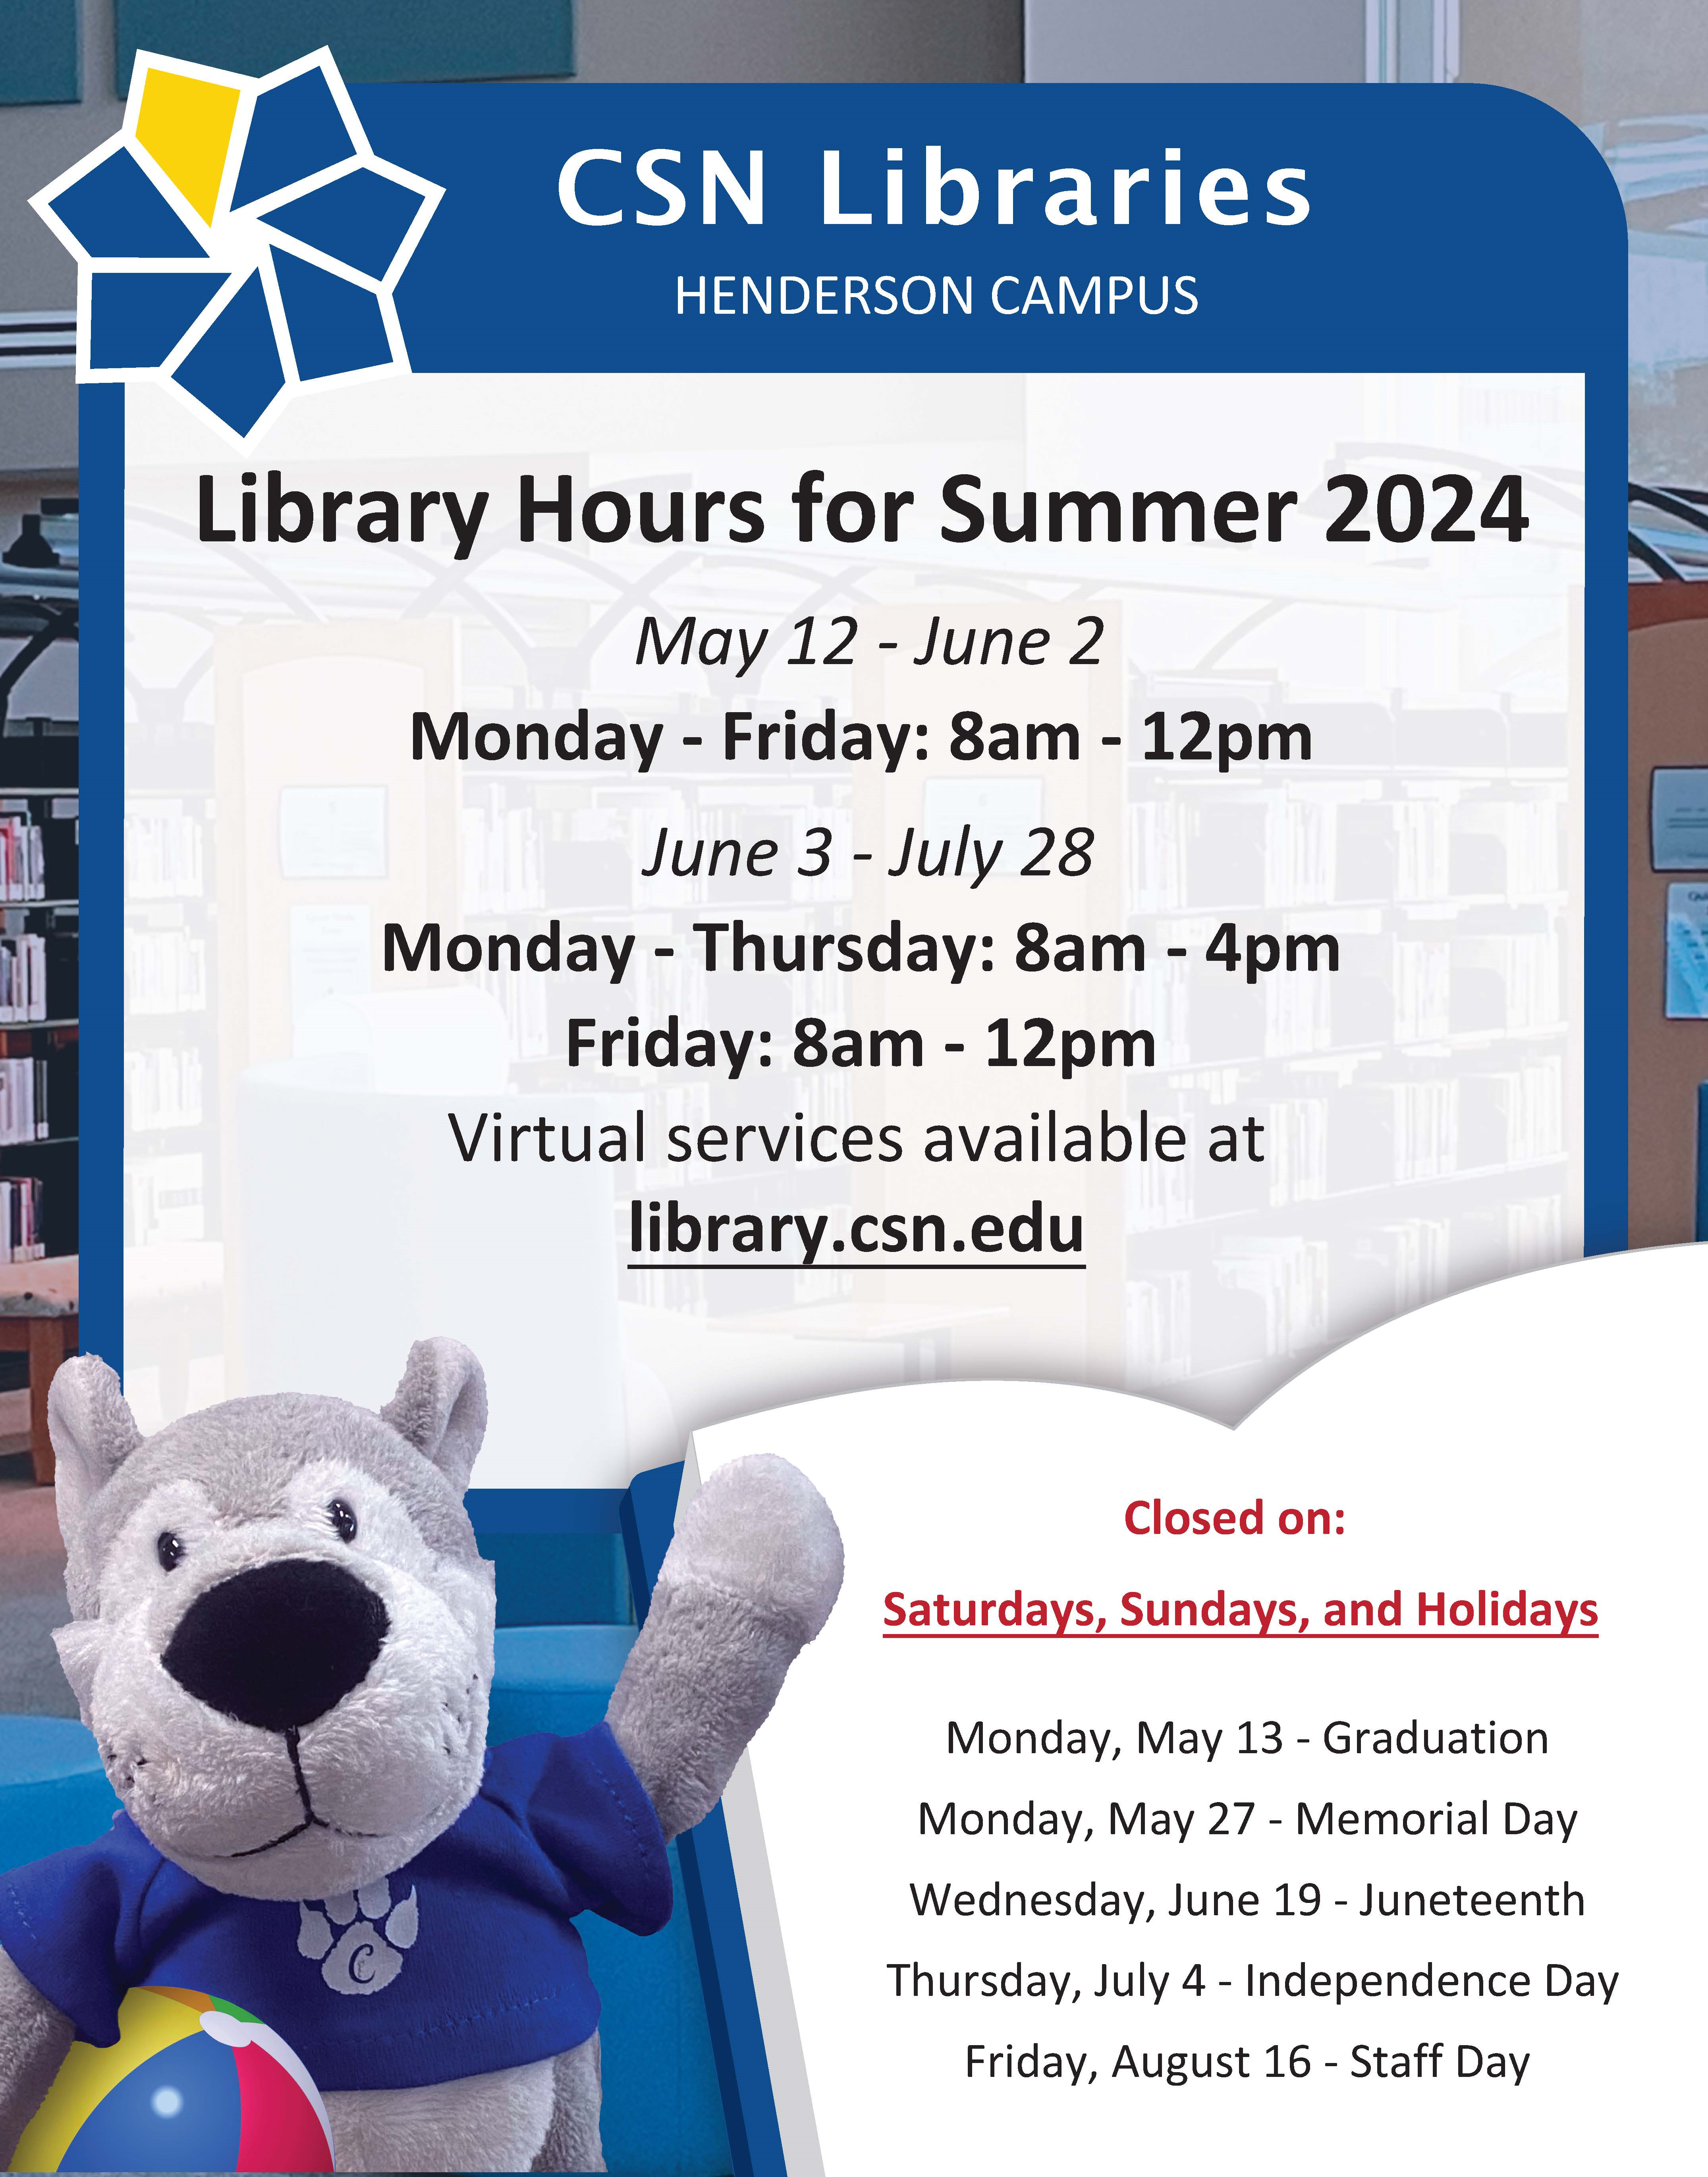 CSN Libraries Summer Hours - Henderson Campus - May 12-July 28